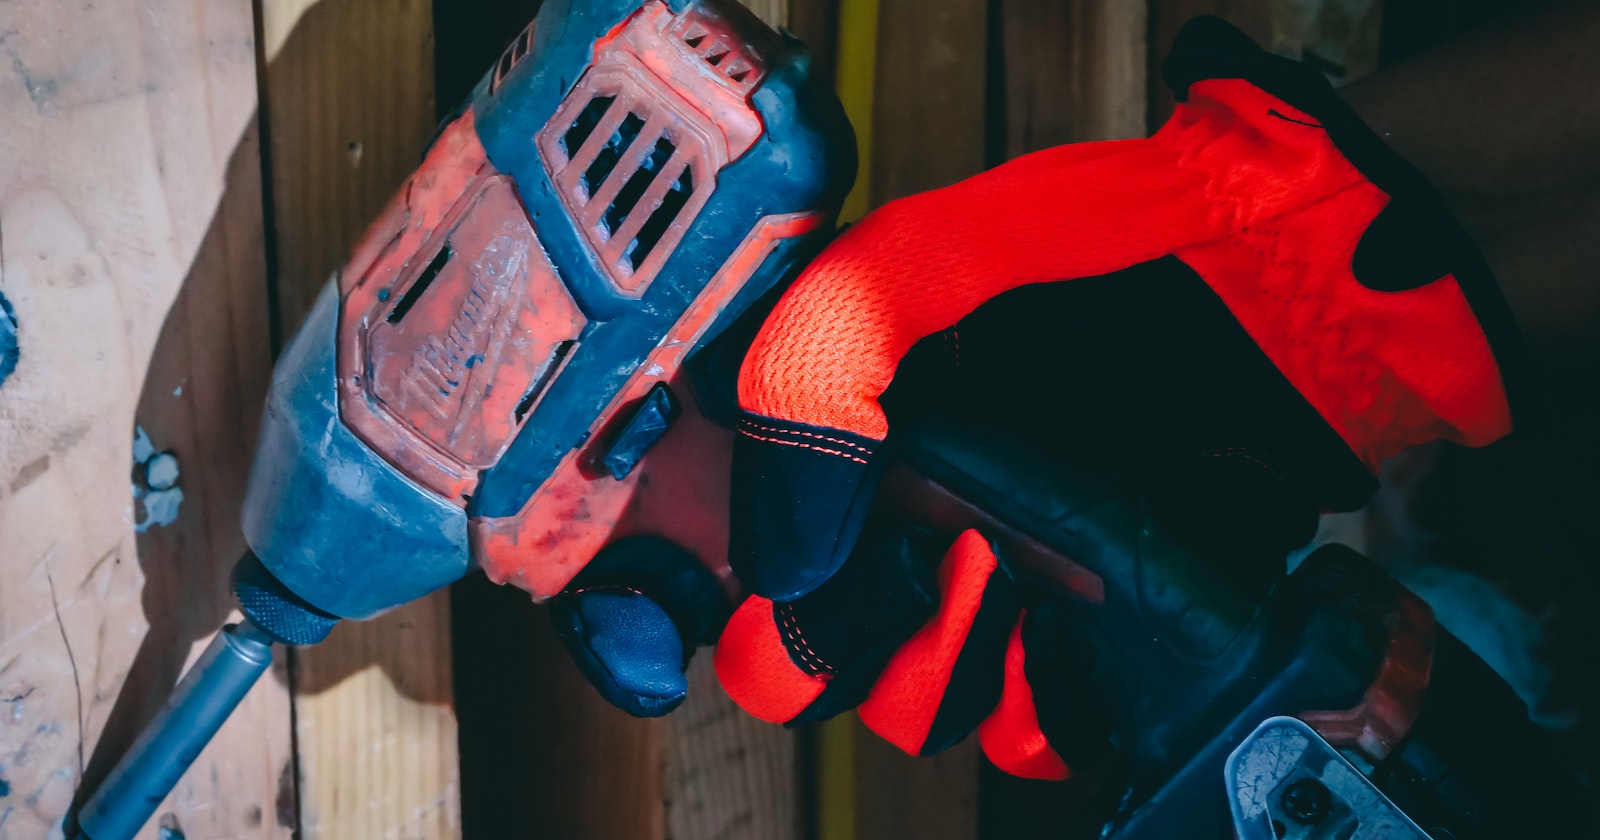 How To Use An Impact Driver To Remove Screws -In 5 Easy Steps